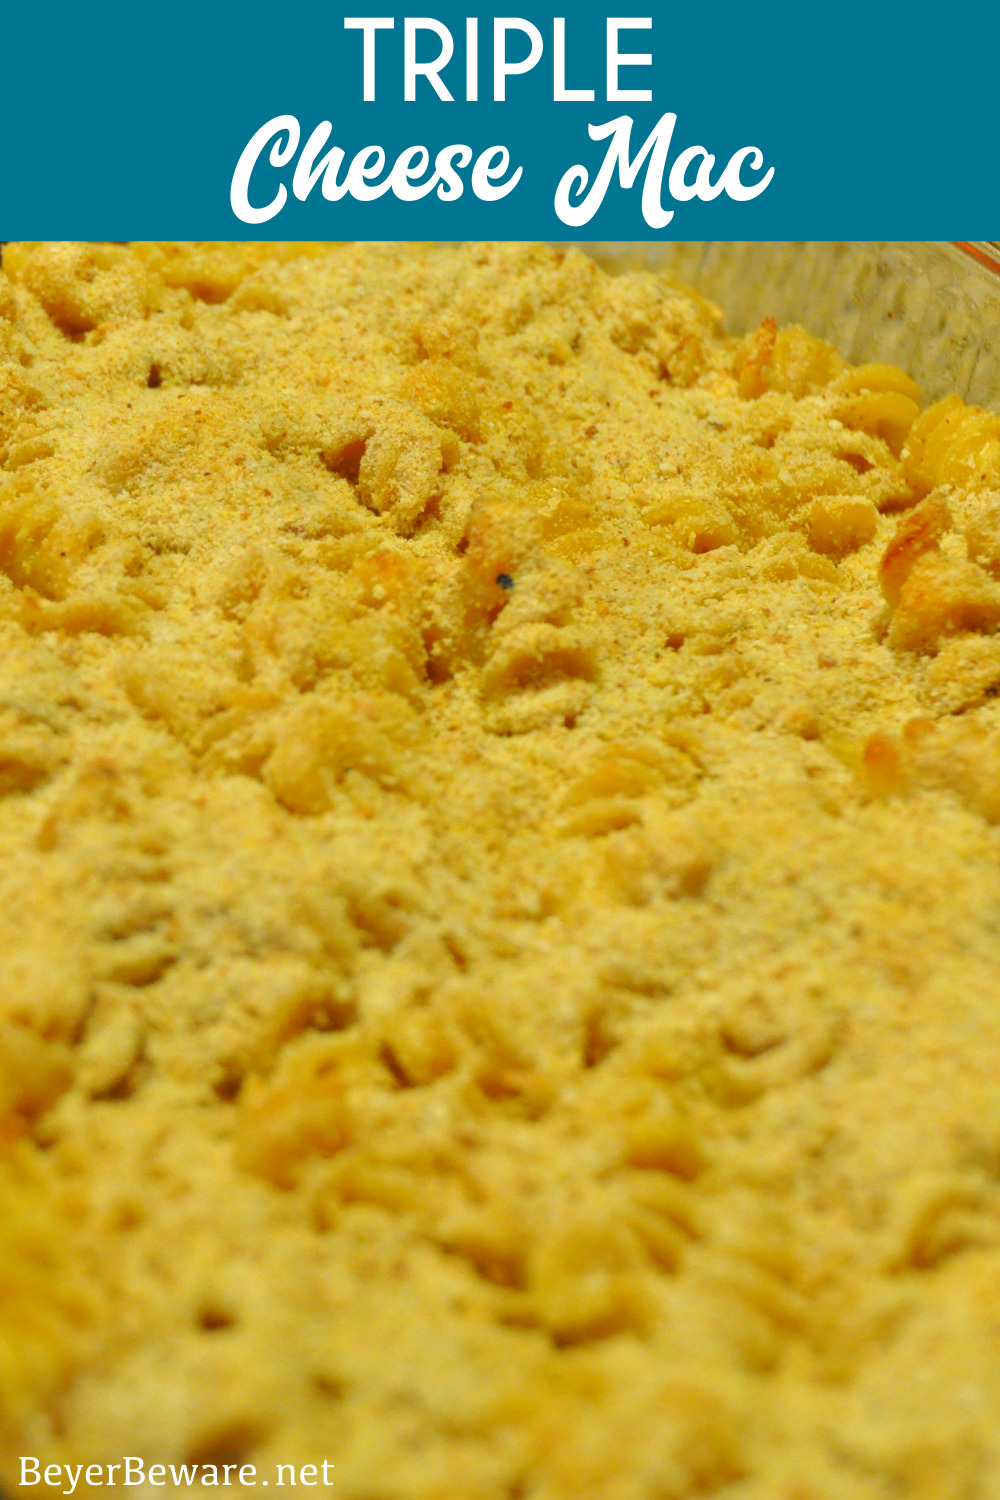 Triple cheese mac is a baked mac and cheese recipe made with three kinds of cheese - cheddar, American, and Parmesan - then topped with breadcrumbs and baked to a bubbly 3-cheese mac and cheese.